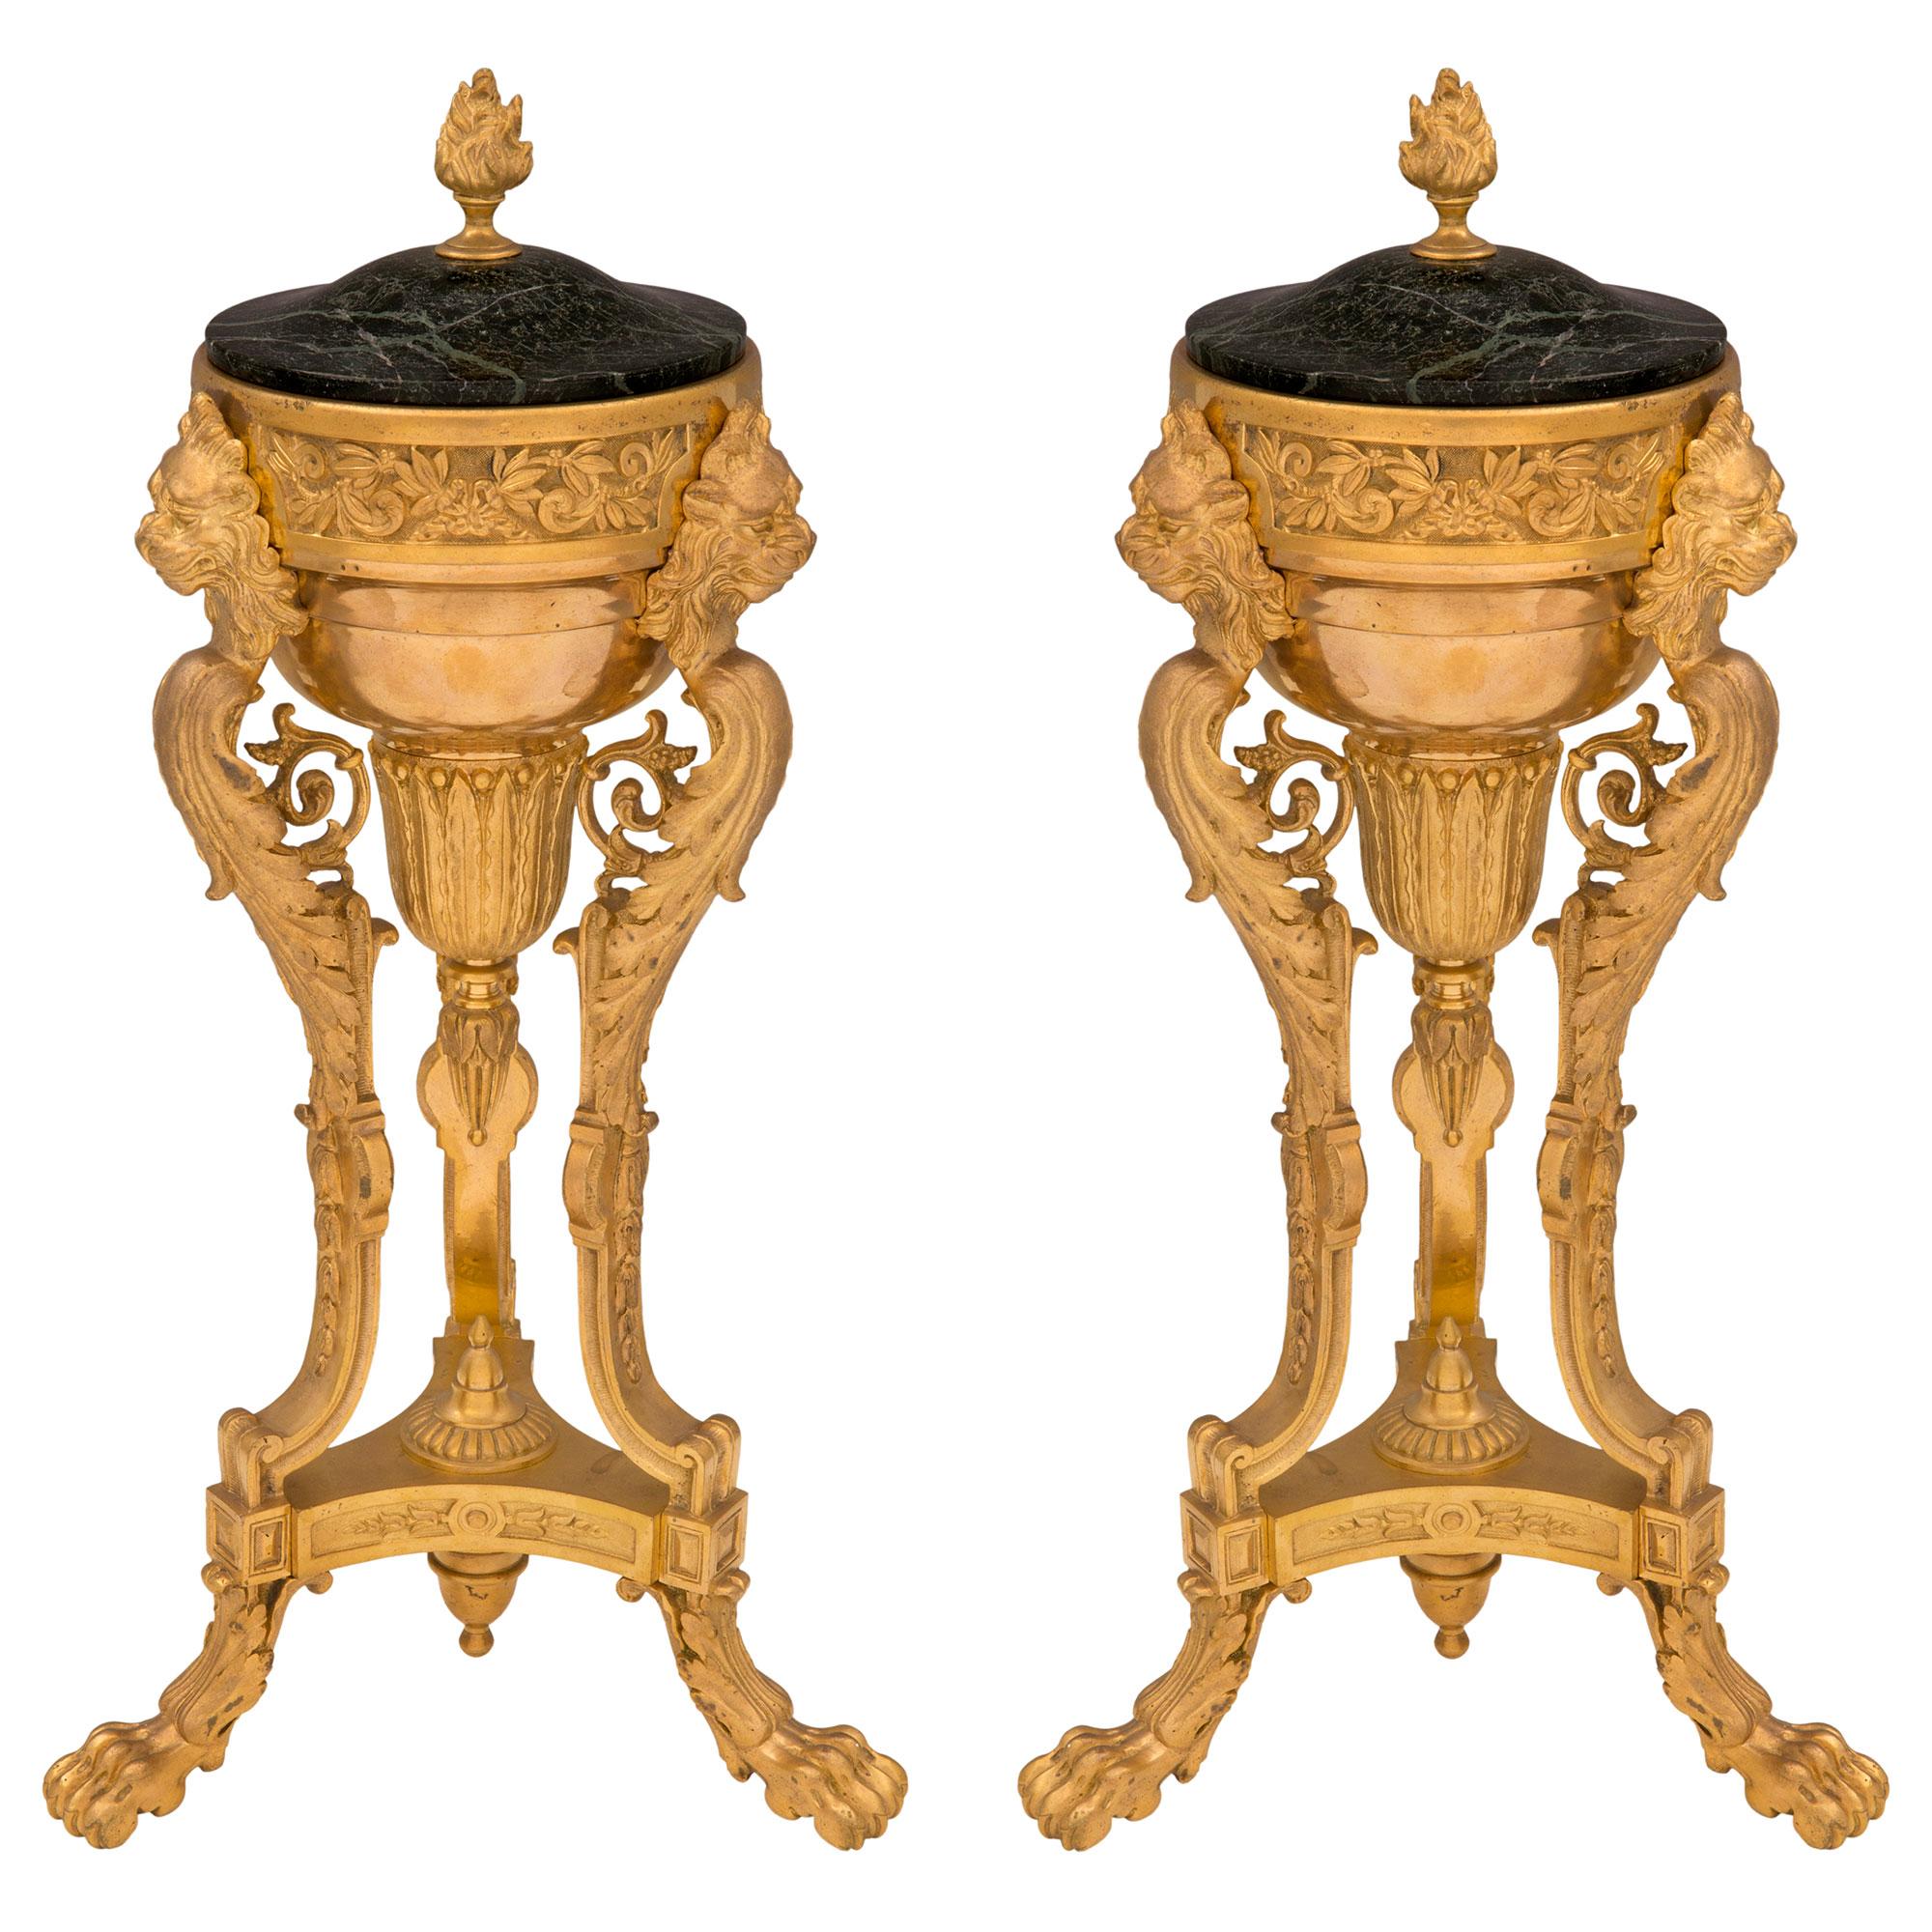 Pair of French 19th Century Neoclassical Style Ormolu and Marble Lidded Urns In Good Condition For Sale In West Palm Beach, FL